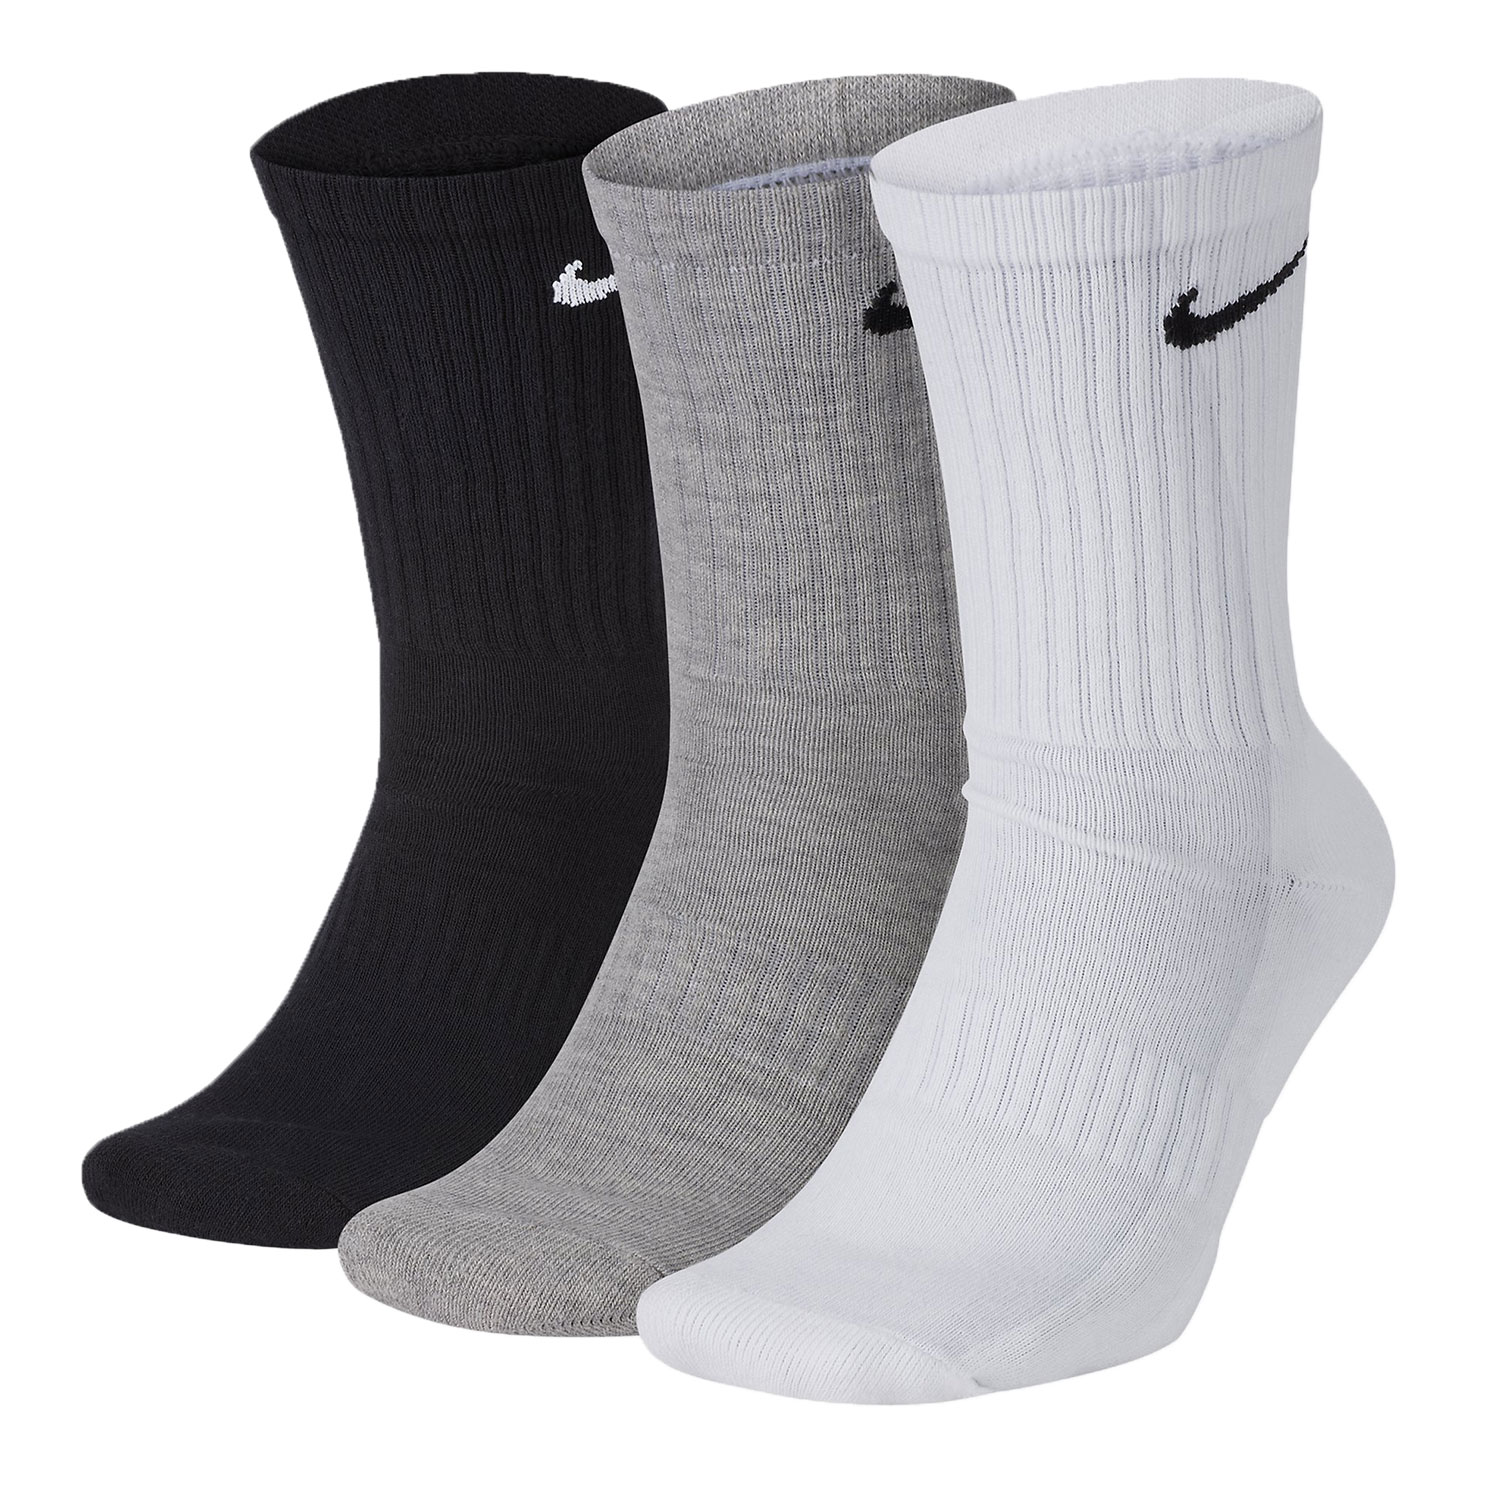 Nike Everyday Cushioned Crew x 3 Calcetines - Multi Color